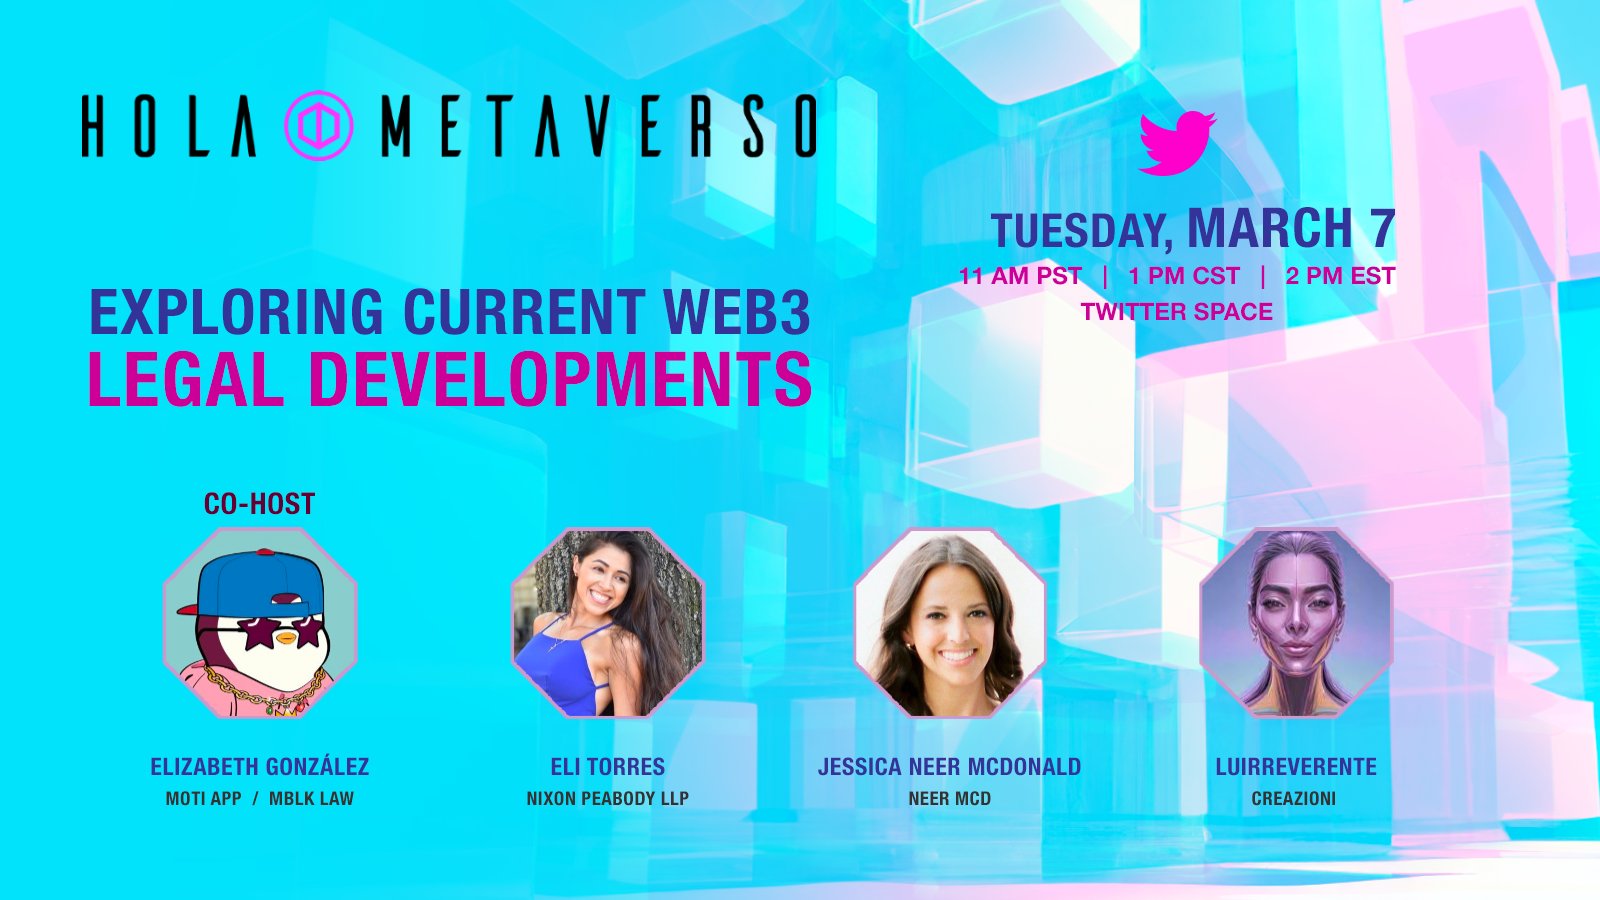 Hola Metaverso- Media & Events 🎪 on X: We are excited for today's space!  ⚖️ Exploring Current Web3 Legal Developments Guest Speakers!  @theweb3attorney @eliana_esq @NeerMcD @luirreverente WE ALSO HAVE A VERY  SPECIAL